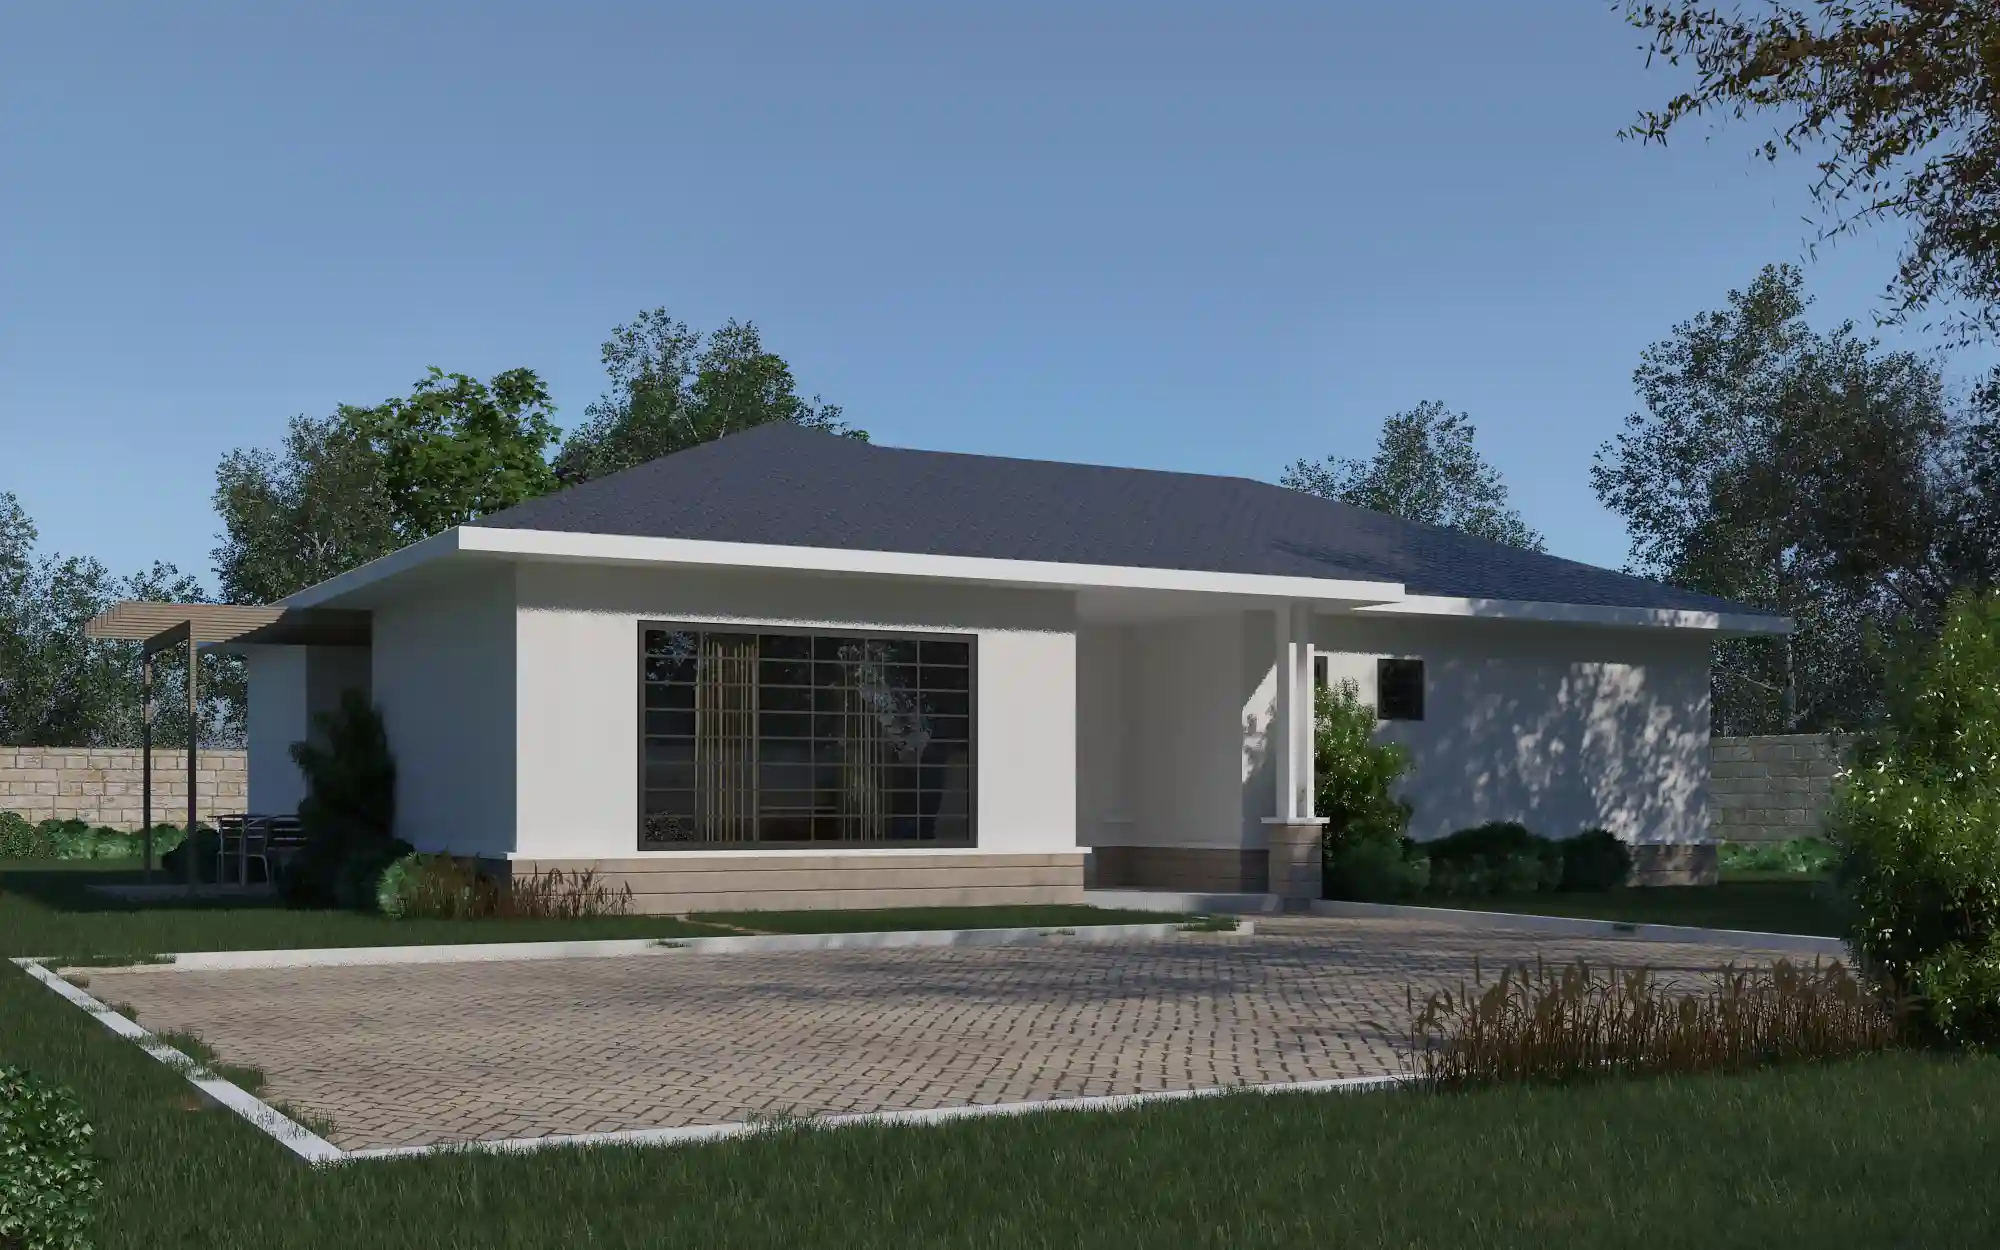 4 Bedroom Bungalow -ID 4111 - 4 BED BNGL TP1 OP1_06_RENDER_edited.jpg from Inuua Tujenge house plans with 4 bedrooms and 2 bathrooms. ( bungalow )